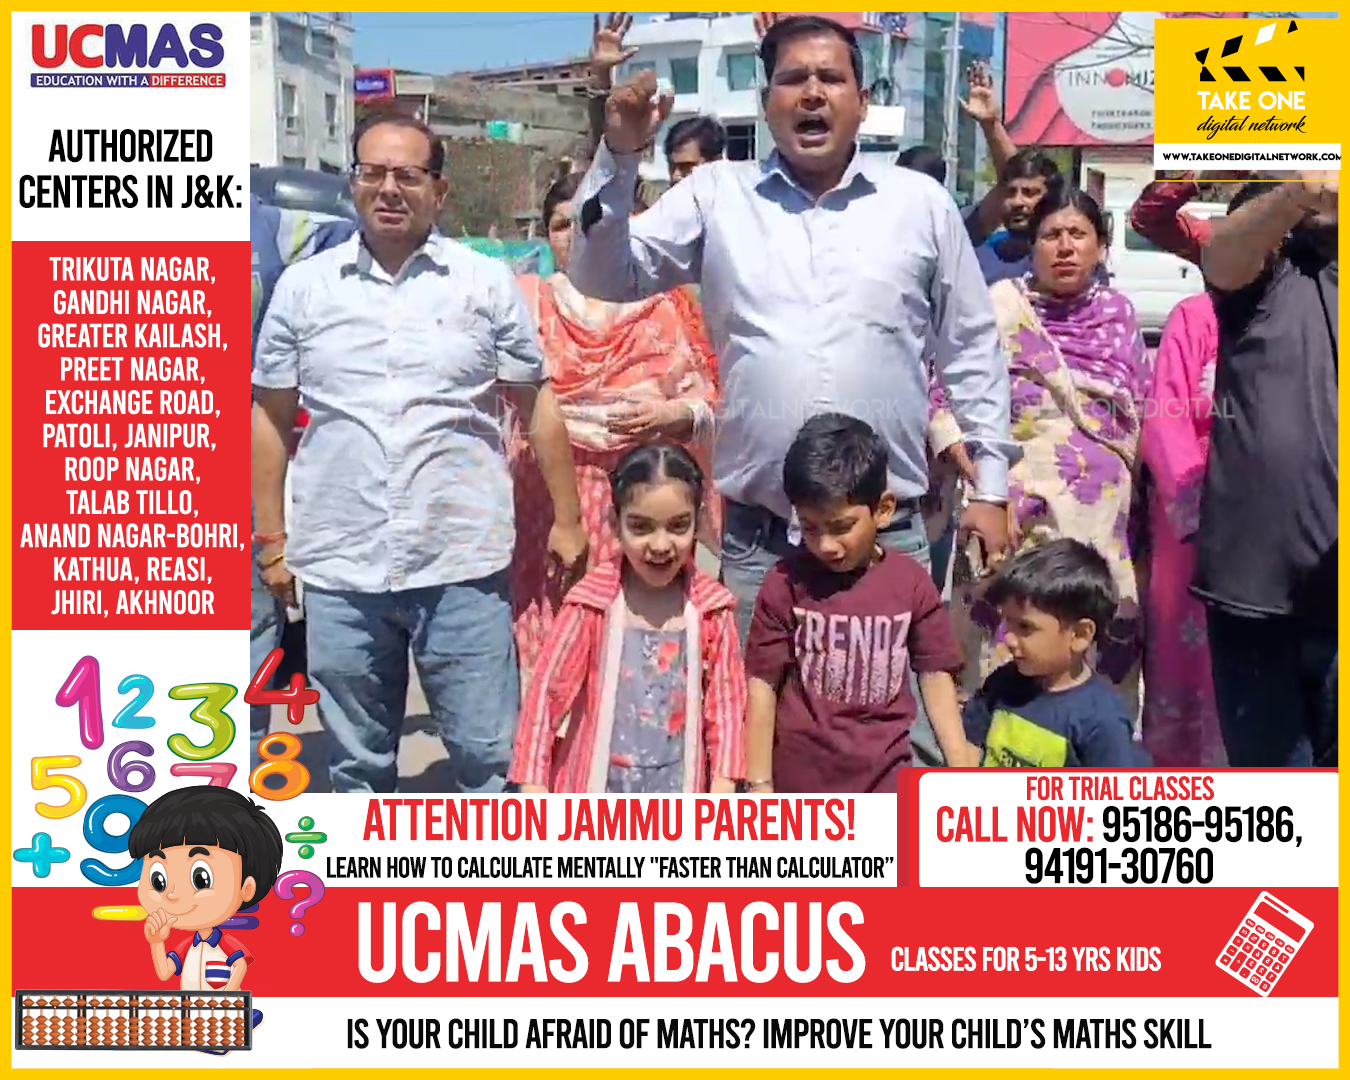 Parents continue to protest in Jammu against fixing minimum age limit for admission